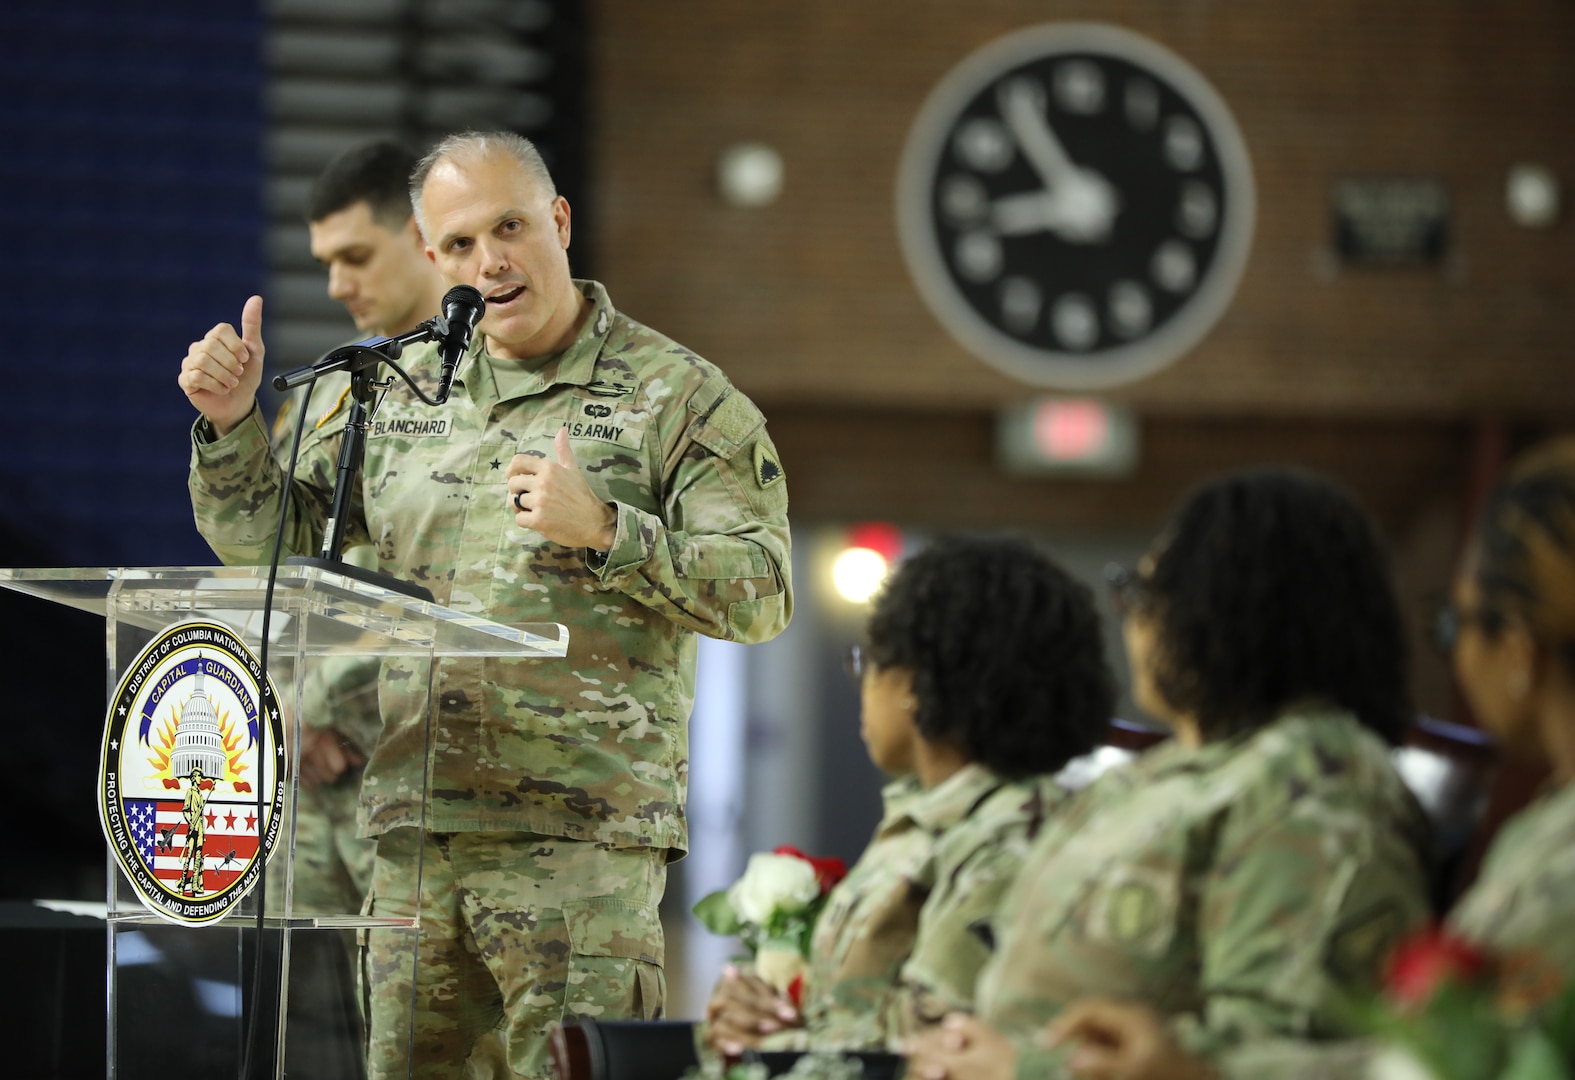 District of Columbia National Guard holds Women Empowerment Panel to commemorate Women’s History Month in the D.C. National Guard Armory, March 28, 2024. The panel features Chief Master Sgt. Naconda Hinton, Senior Enlisted Leader, 113th Medical Group; Capt. Mayauda Bowens, Logistics Support Operations Officer; Chief Warrant Officer 3 Annette Johnson-Tate, DCARNG Officer Strength Manager; Vakisa Bragg, Program Analyst and Ms. Nicole McDermott, Chief of Staff (DCGO-DCNG).